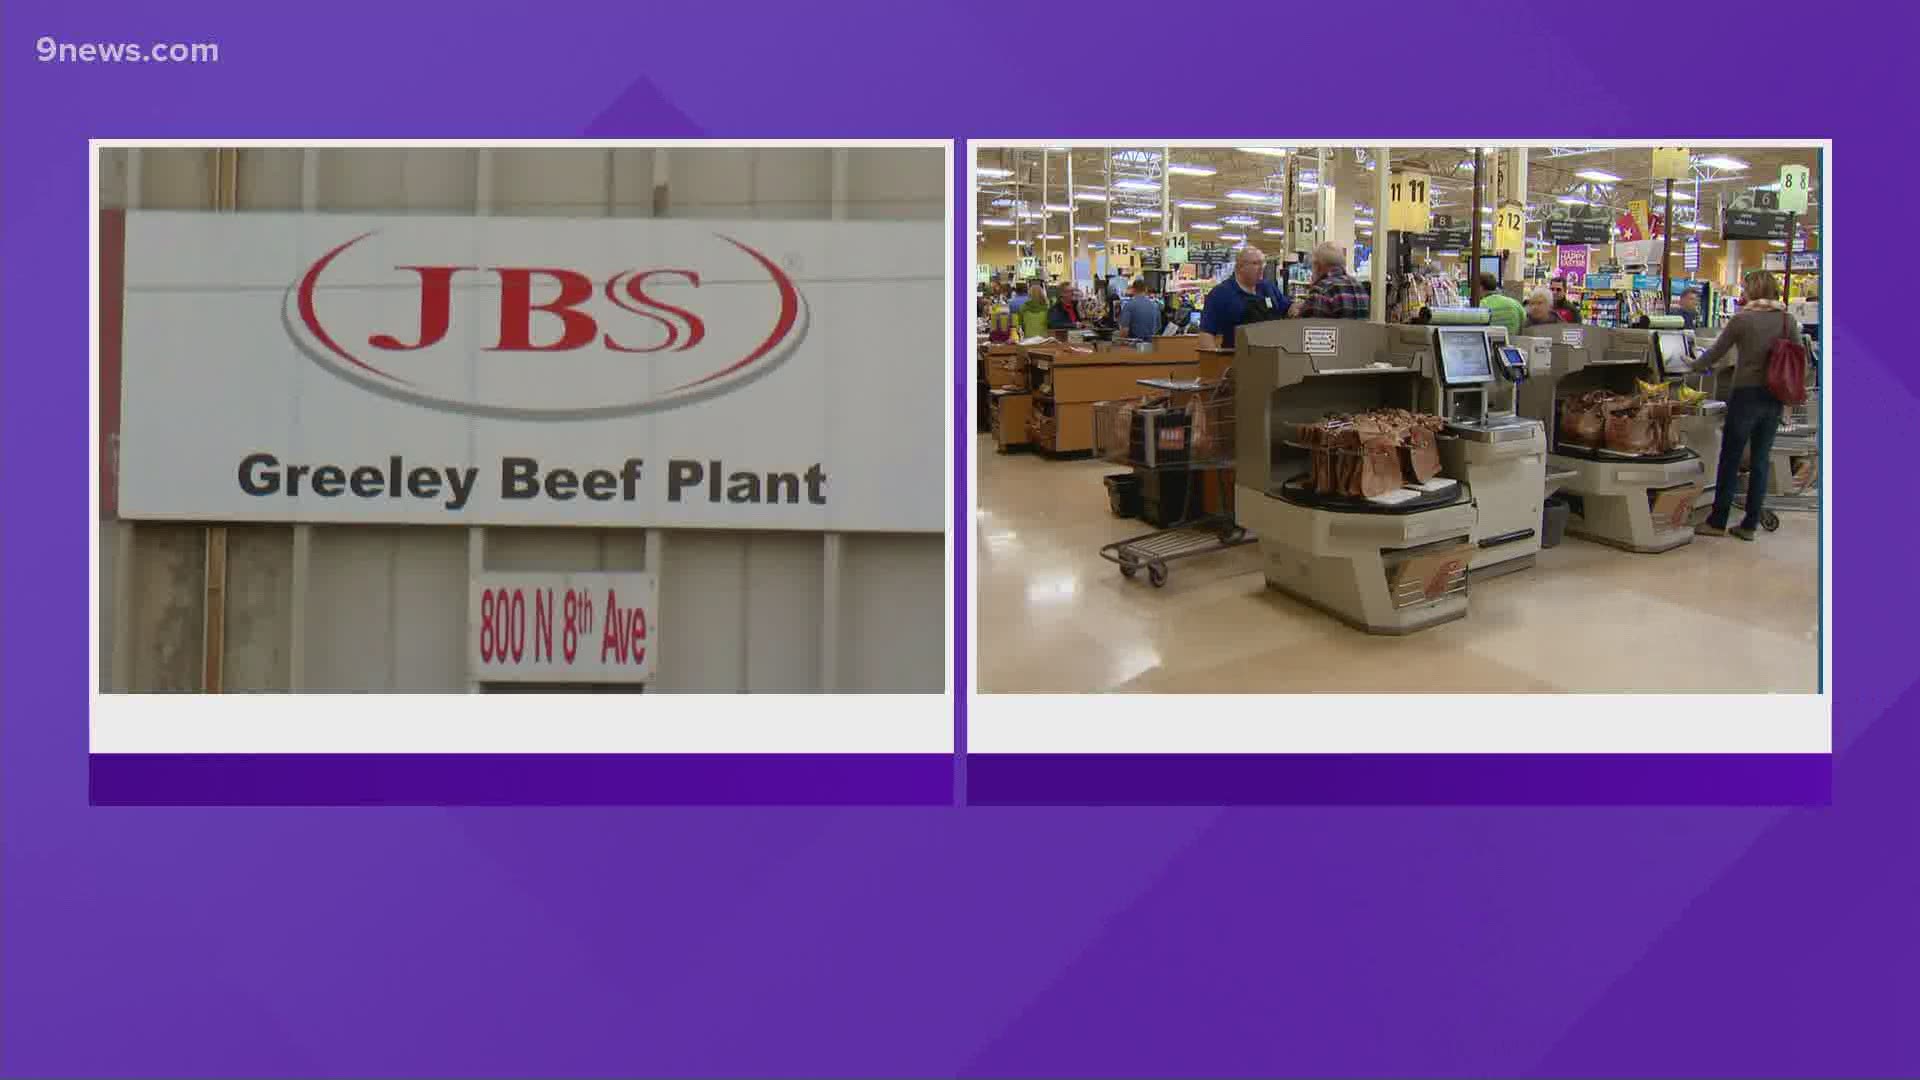 The United Food and Commercial Workers (UFCW) union confirmed to 9NEWS that an eighth employee of the JBS plant in Greeley has died due to COVID-19.